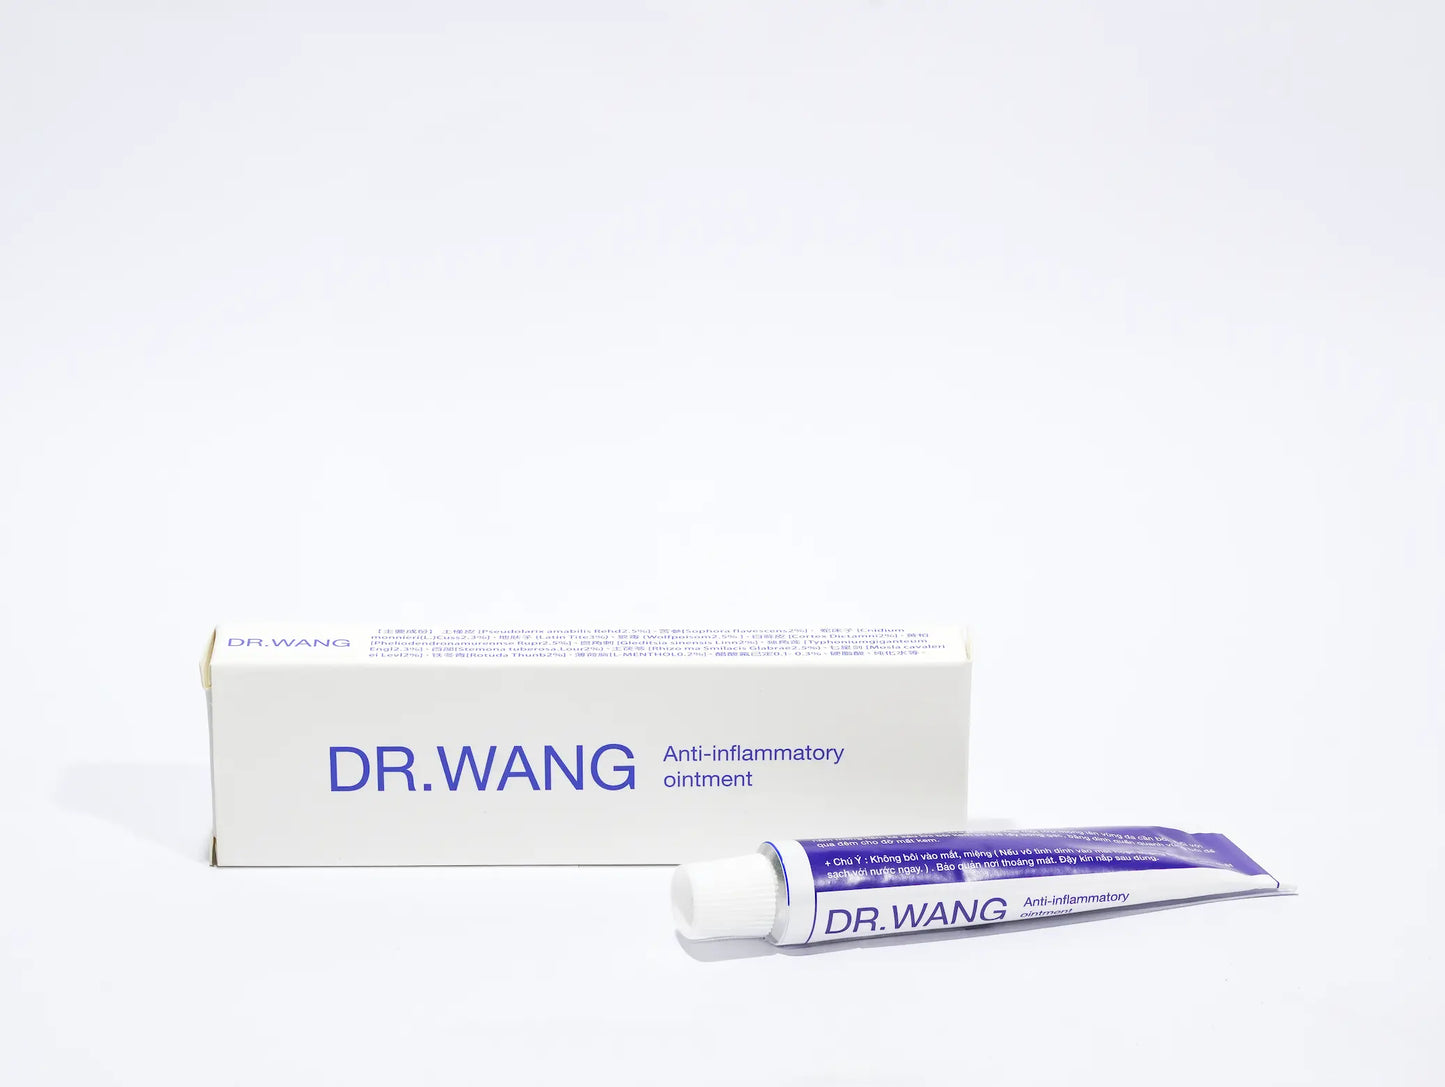 Dr. Wang Derma: Eczema Cream for Itchy, Dry Skin Relief